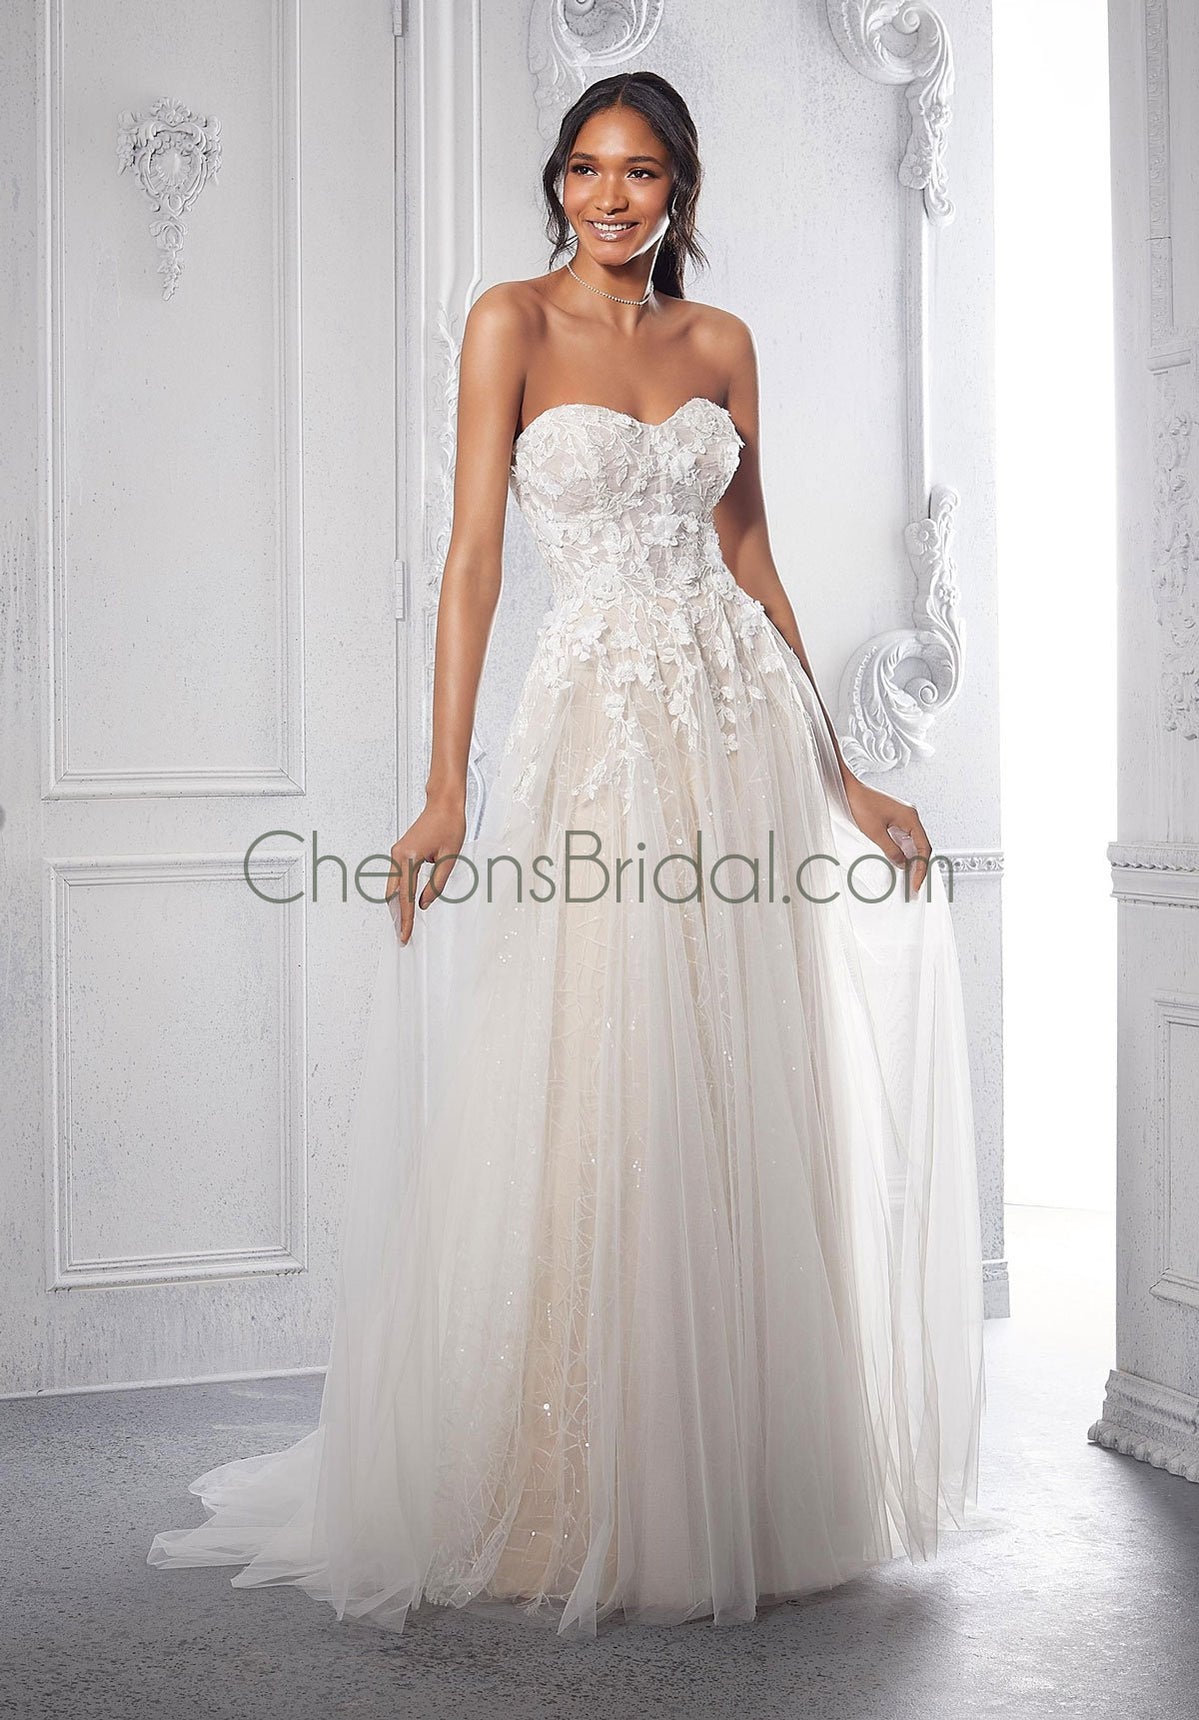 Morilee - 2361 - Camellia - Cheron's Bridal, Wedding Gown - Cheron's Bridal  & All Dressed Up Prom